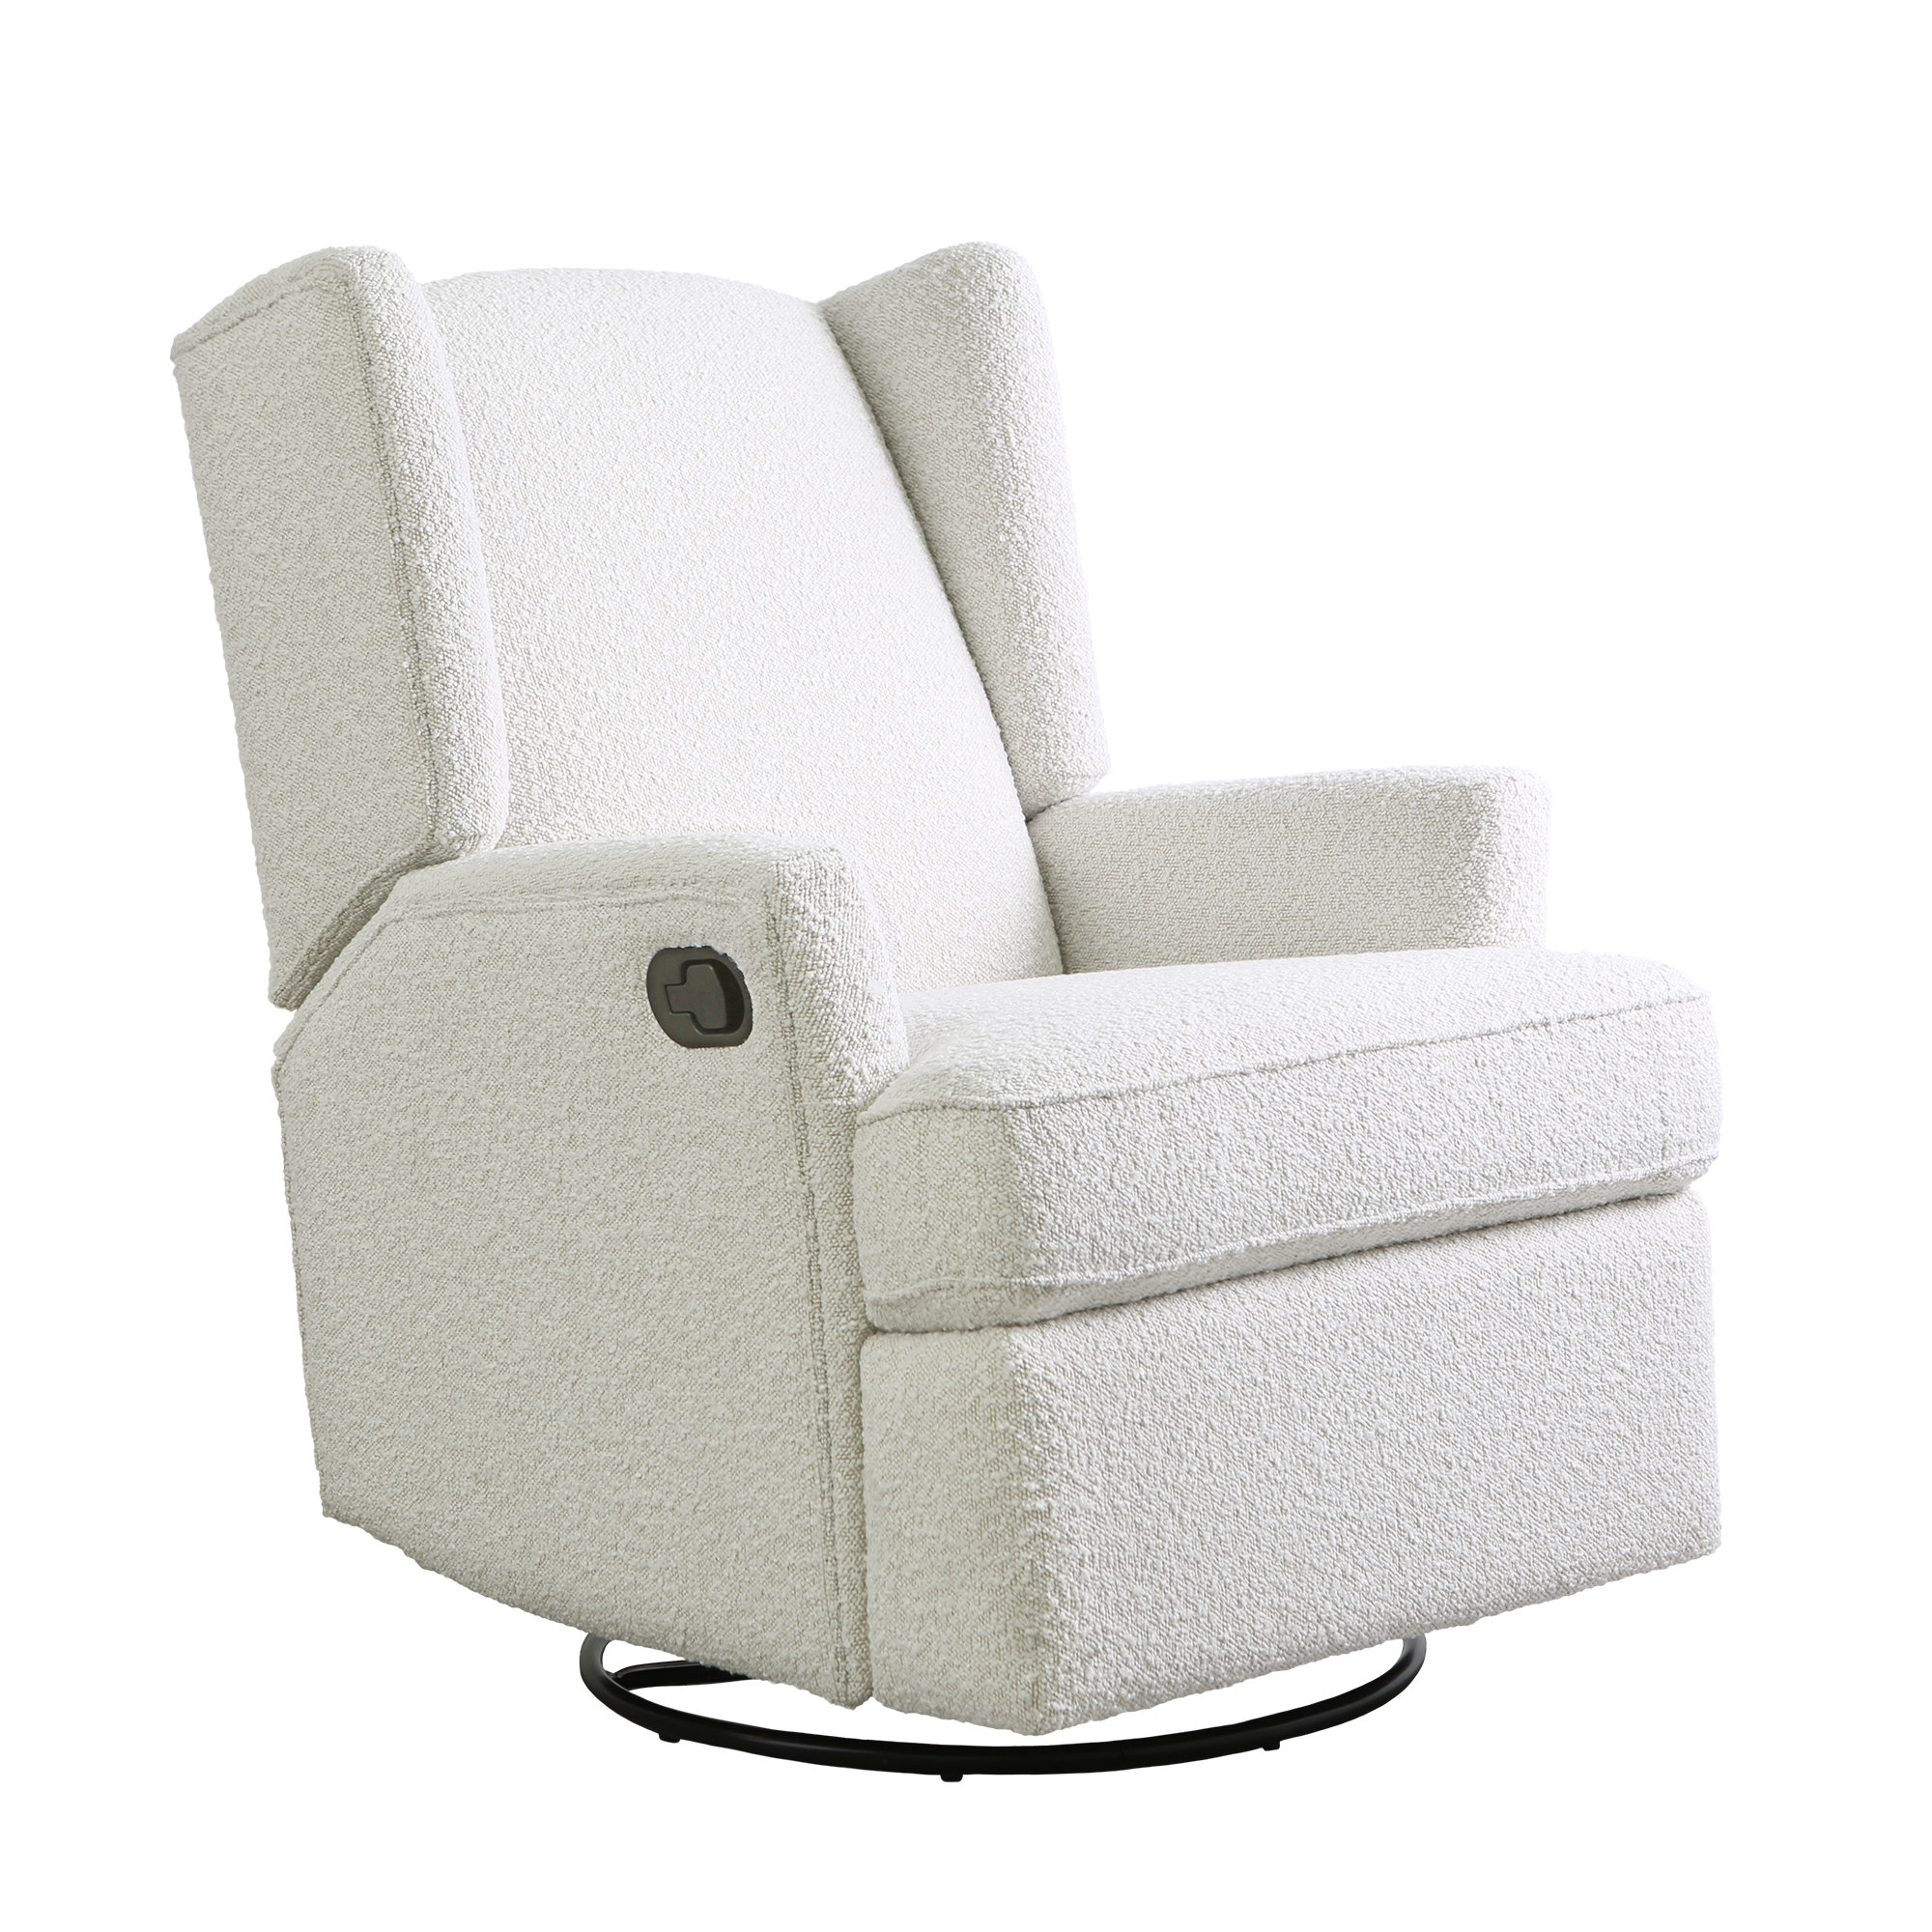 Second Story Home Swivel Reclining Glider & Reviews